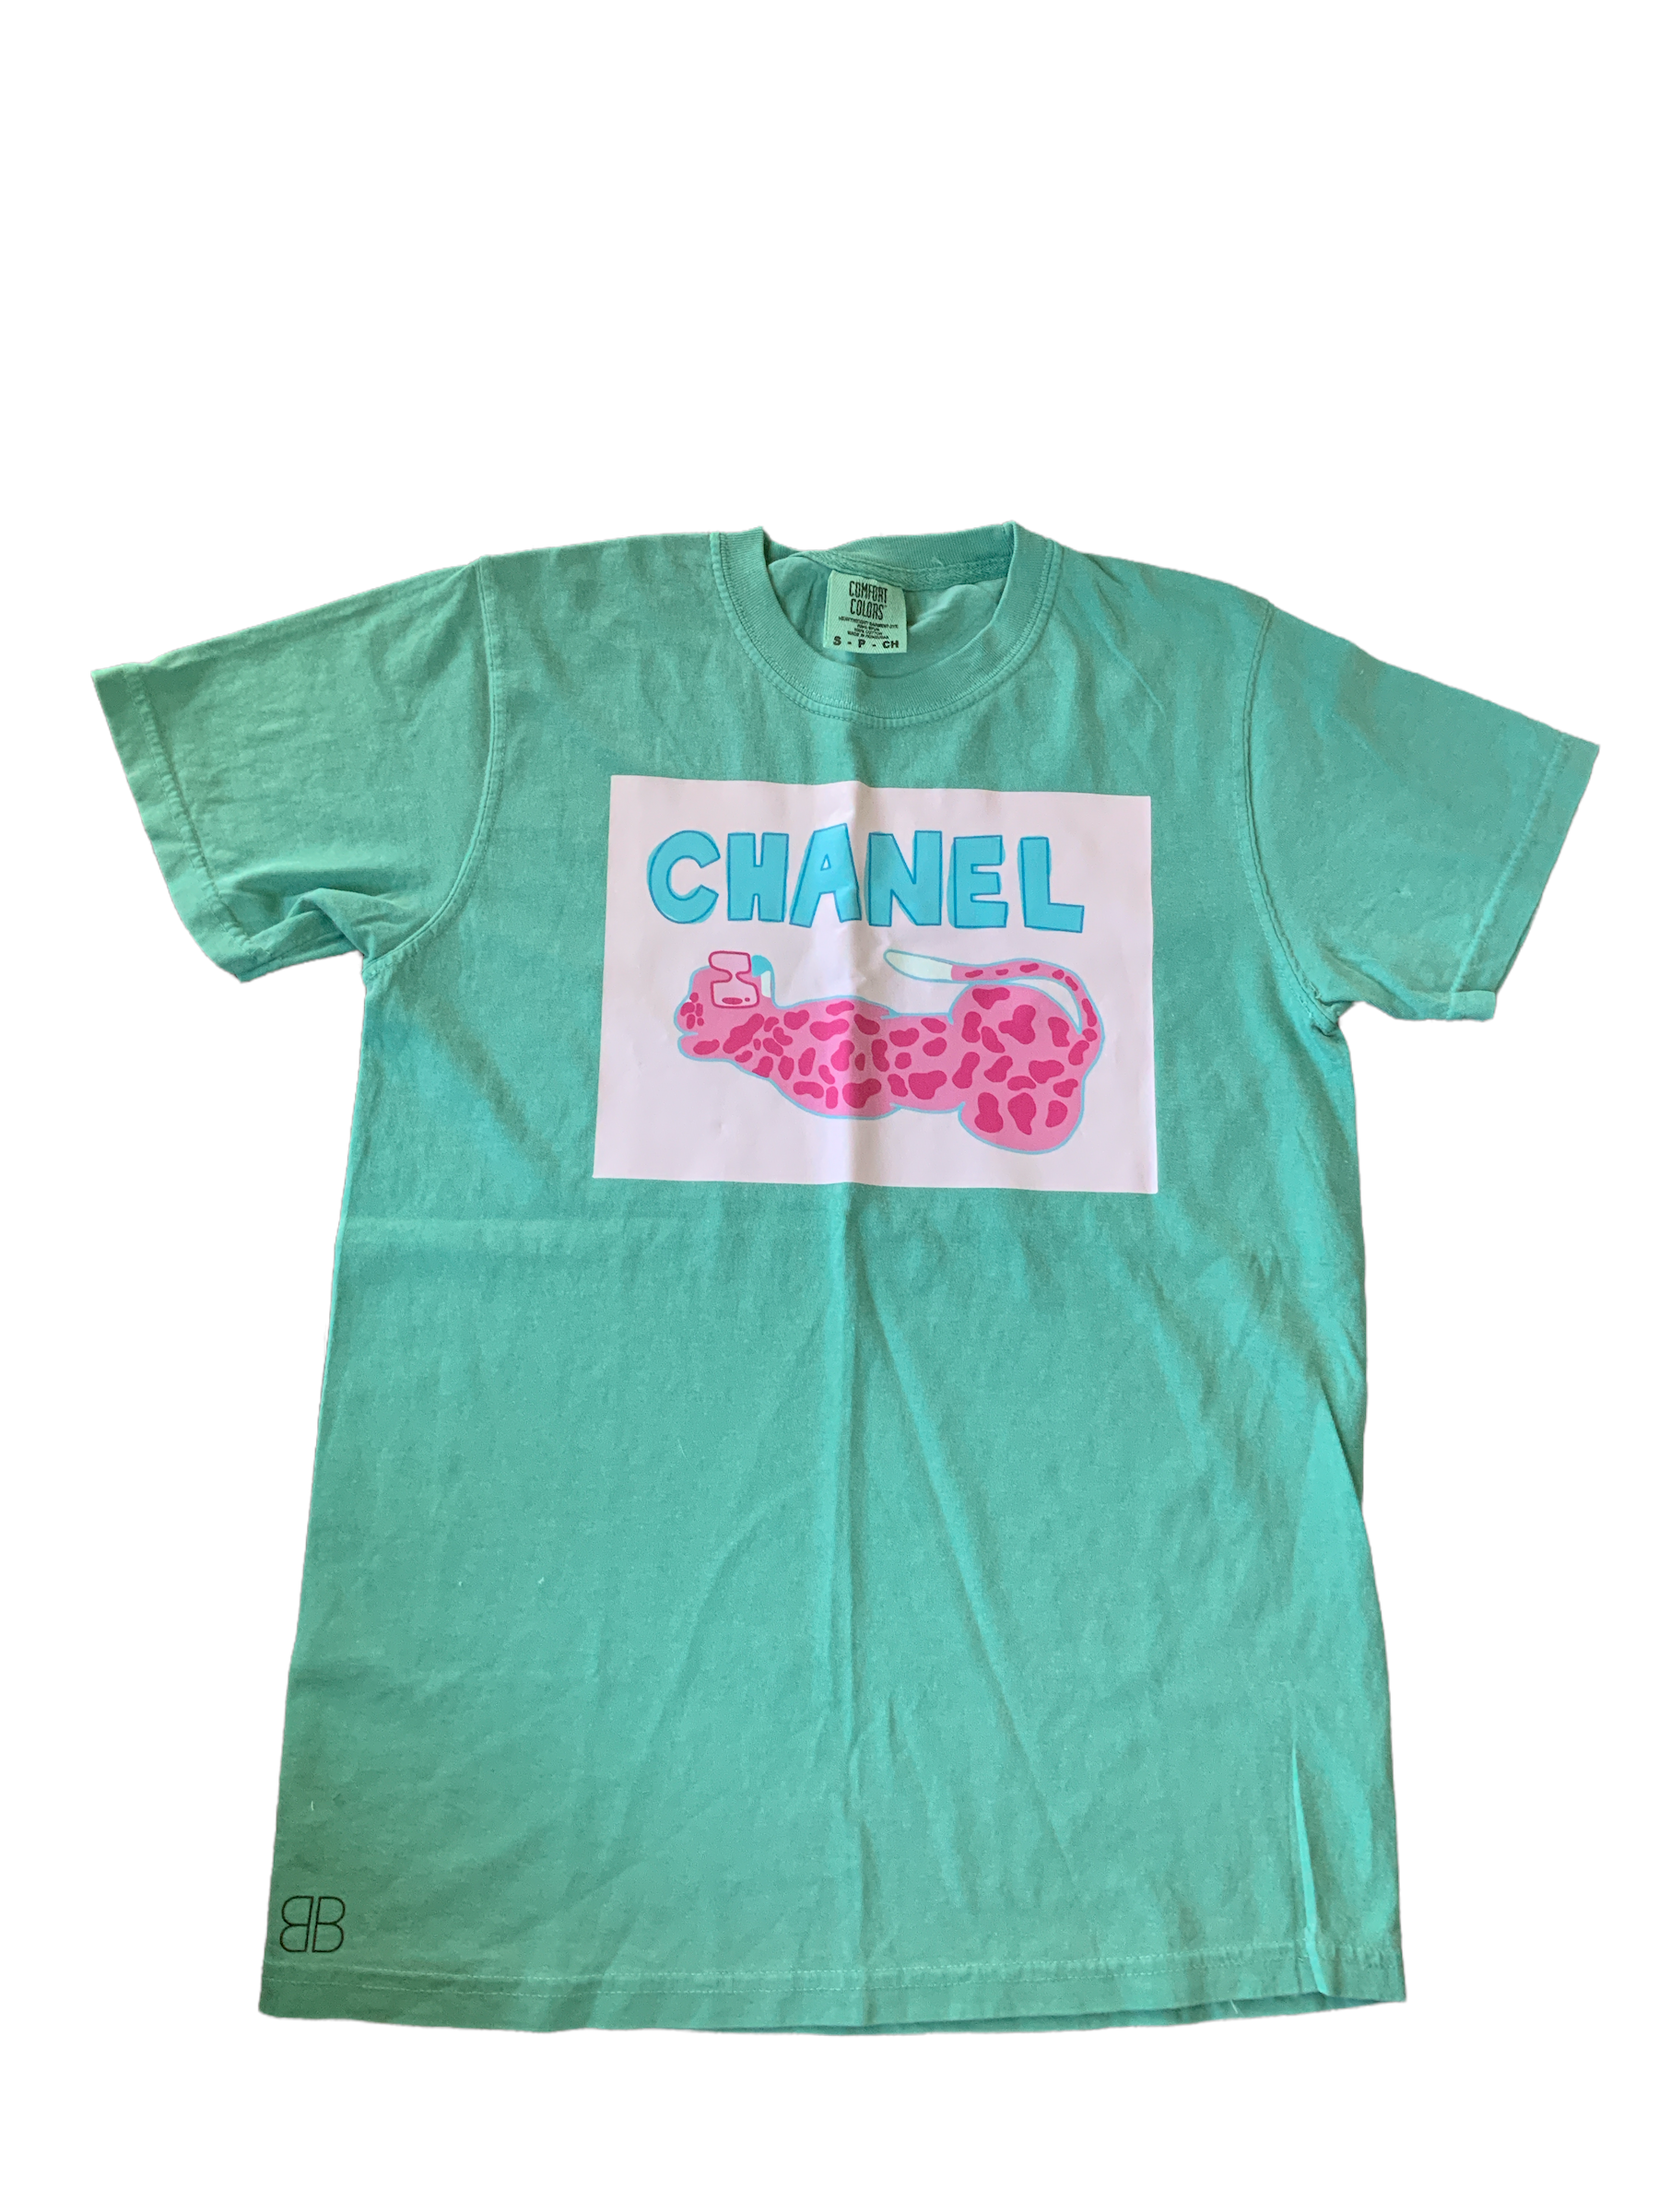 RTS Adult (S) FLAWED Teal Chanel (Graphic T-shirt) - Baby Bums Clothing 